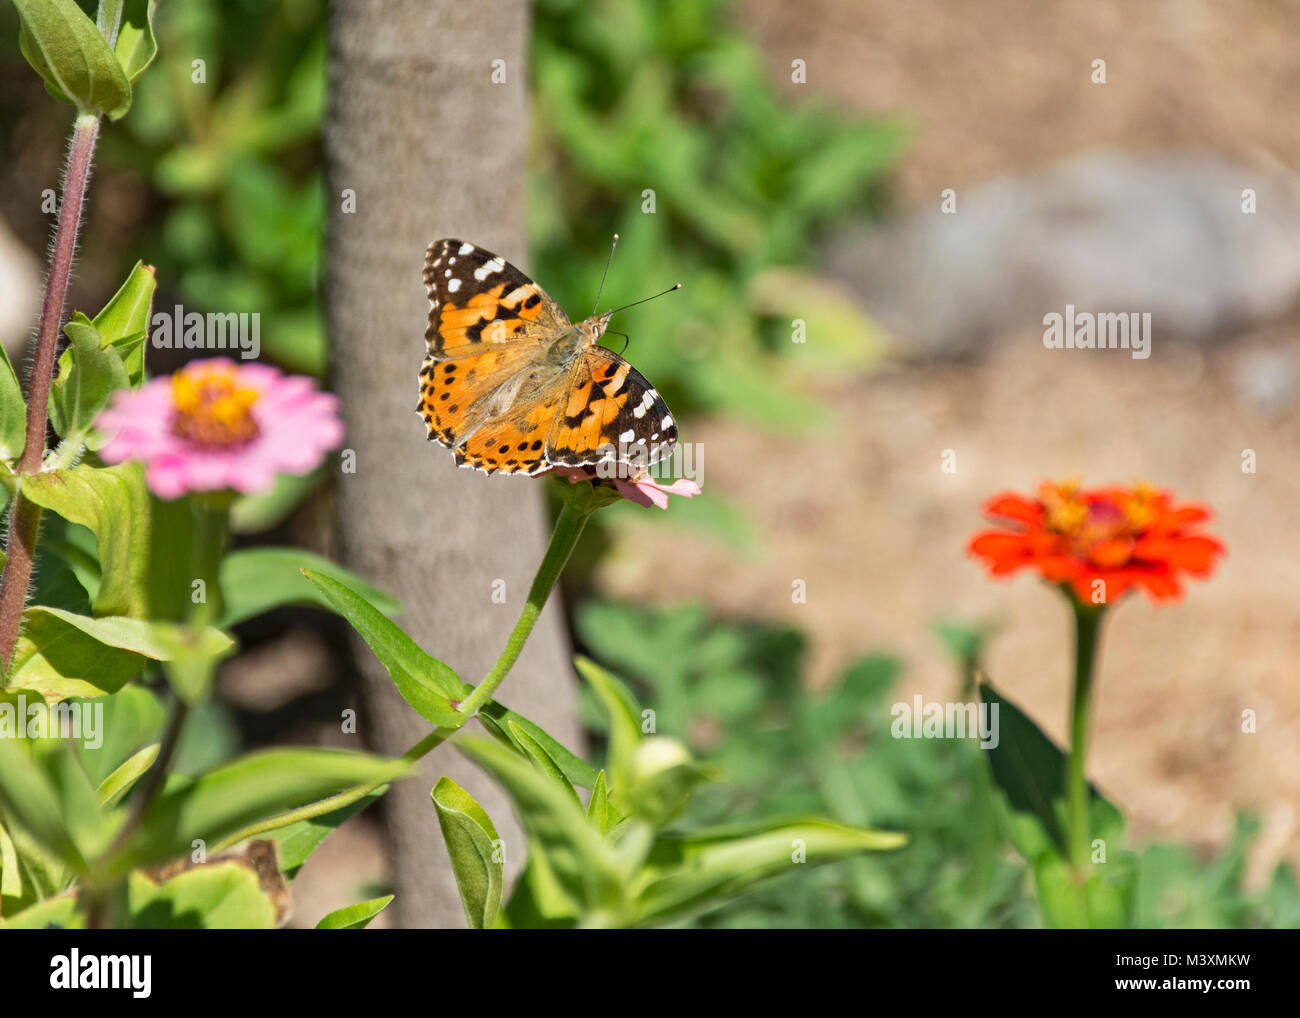 closeup of an orange painted lady butterfly feeding on a zinnia flower with a blurred garden in the background Stock Photo